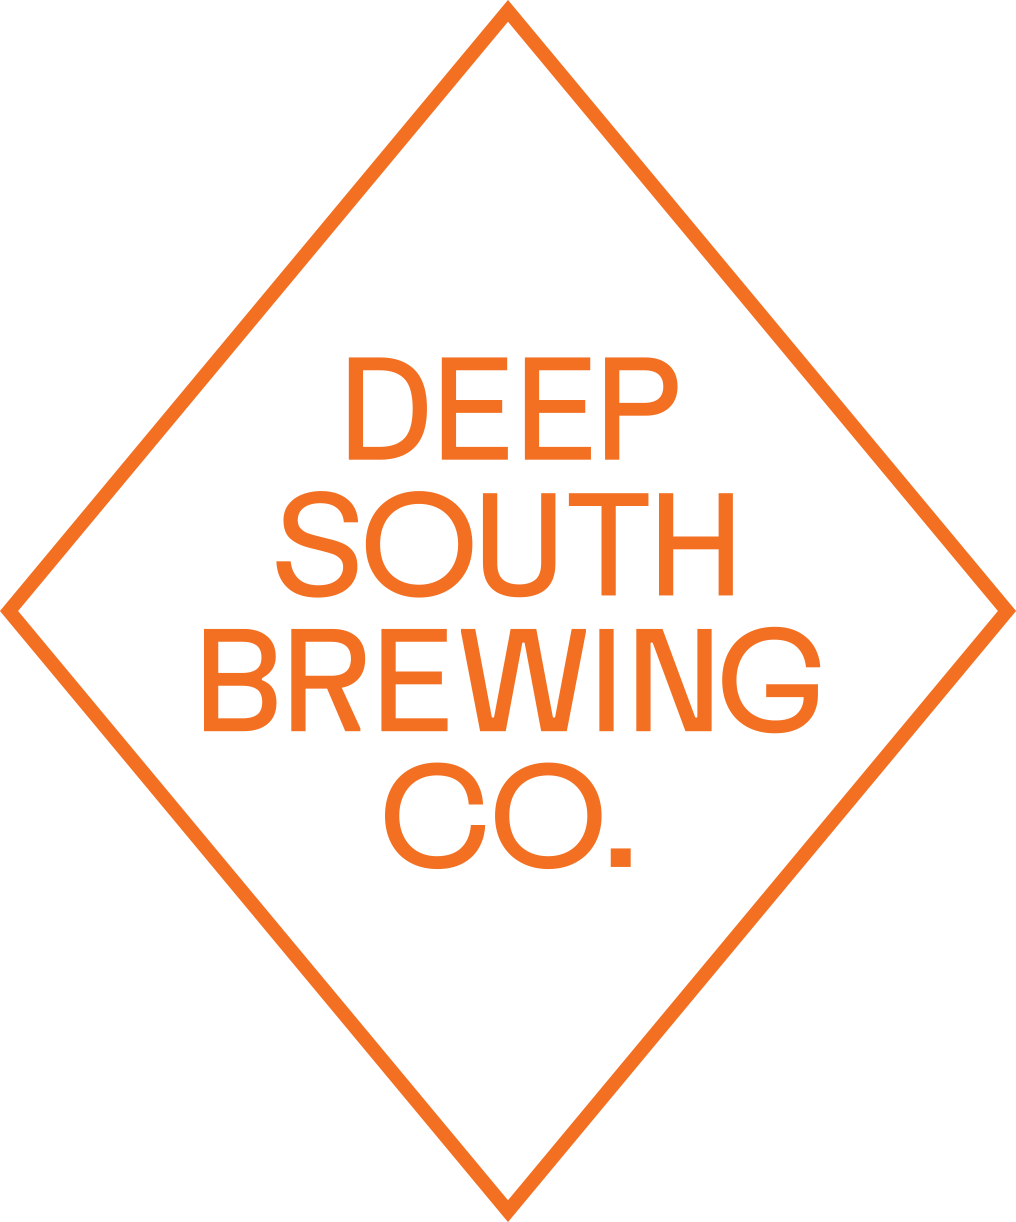 Deep South Brewing Co.